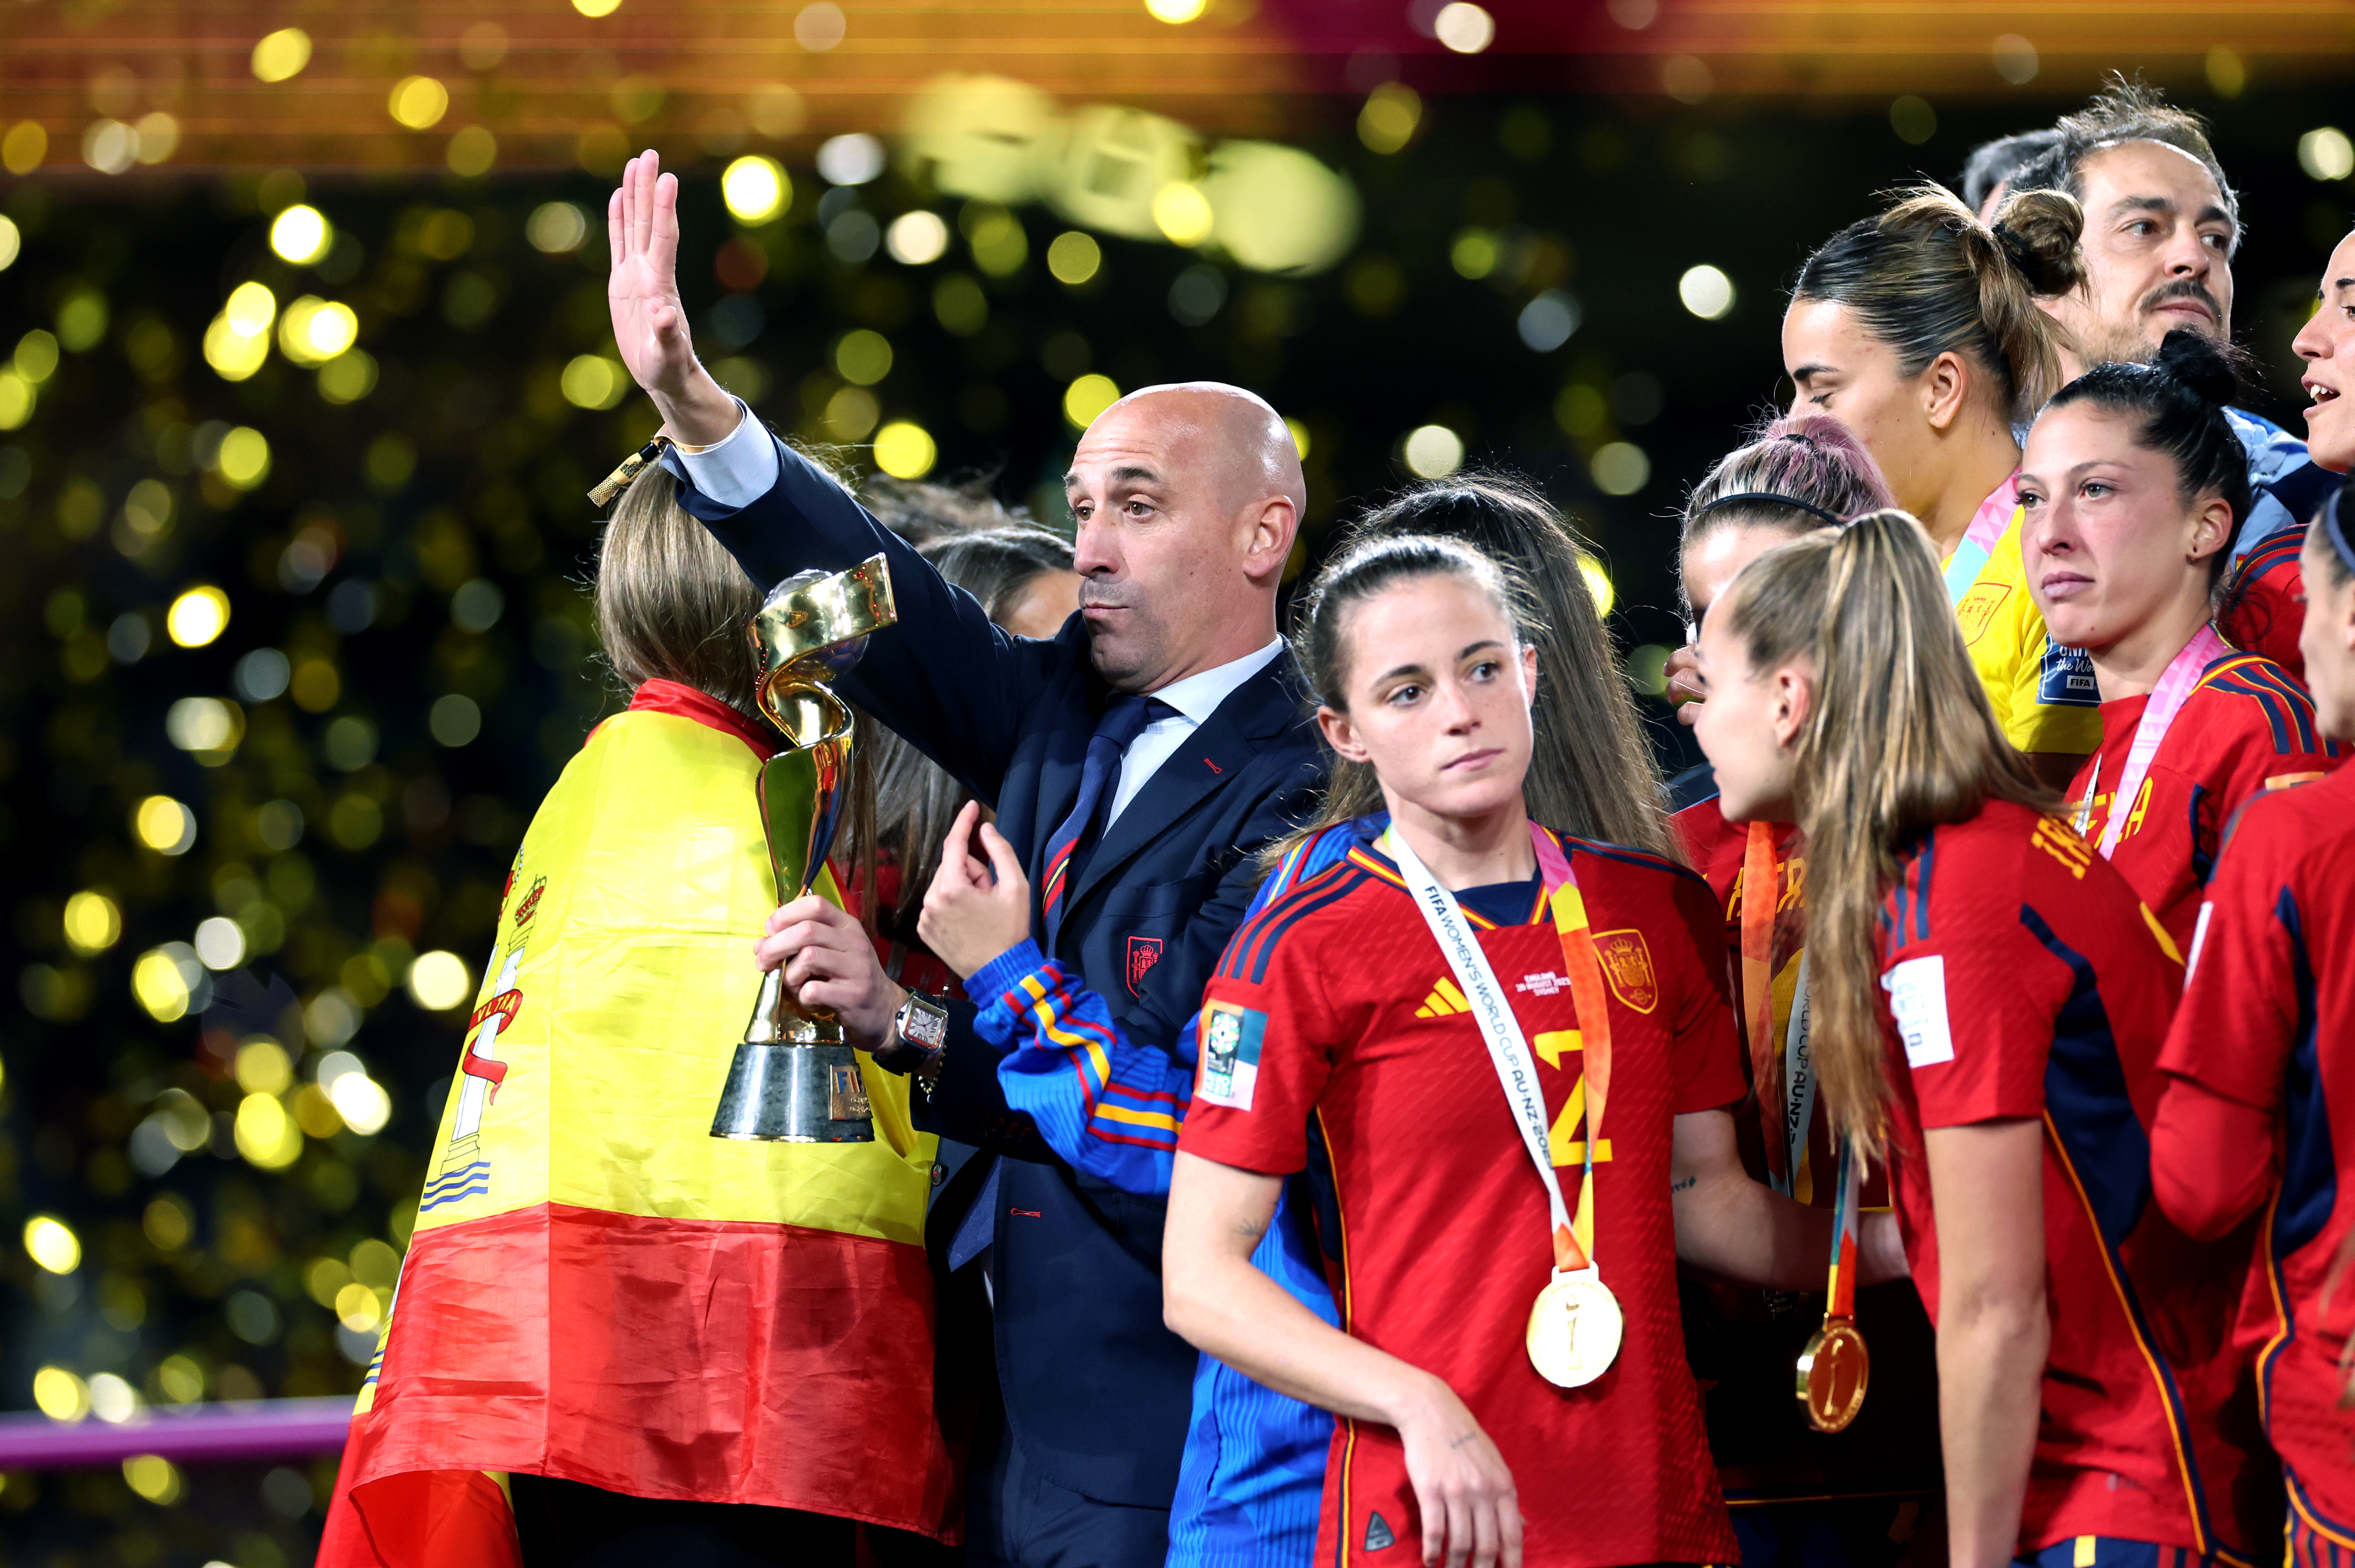 Rubiales' conduct at last month's World Cup final is the subject of a FIFA investigation